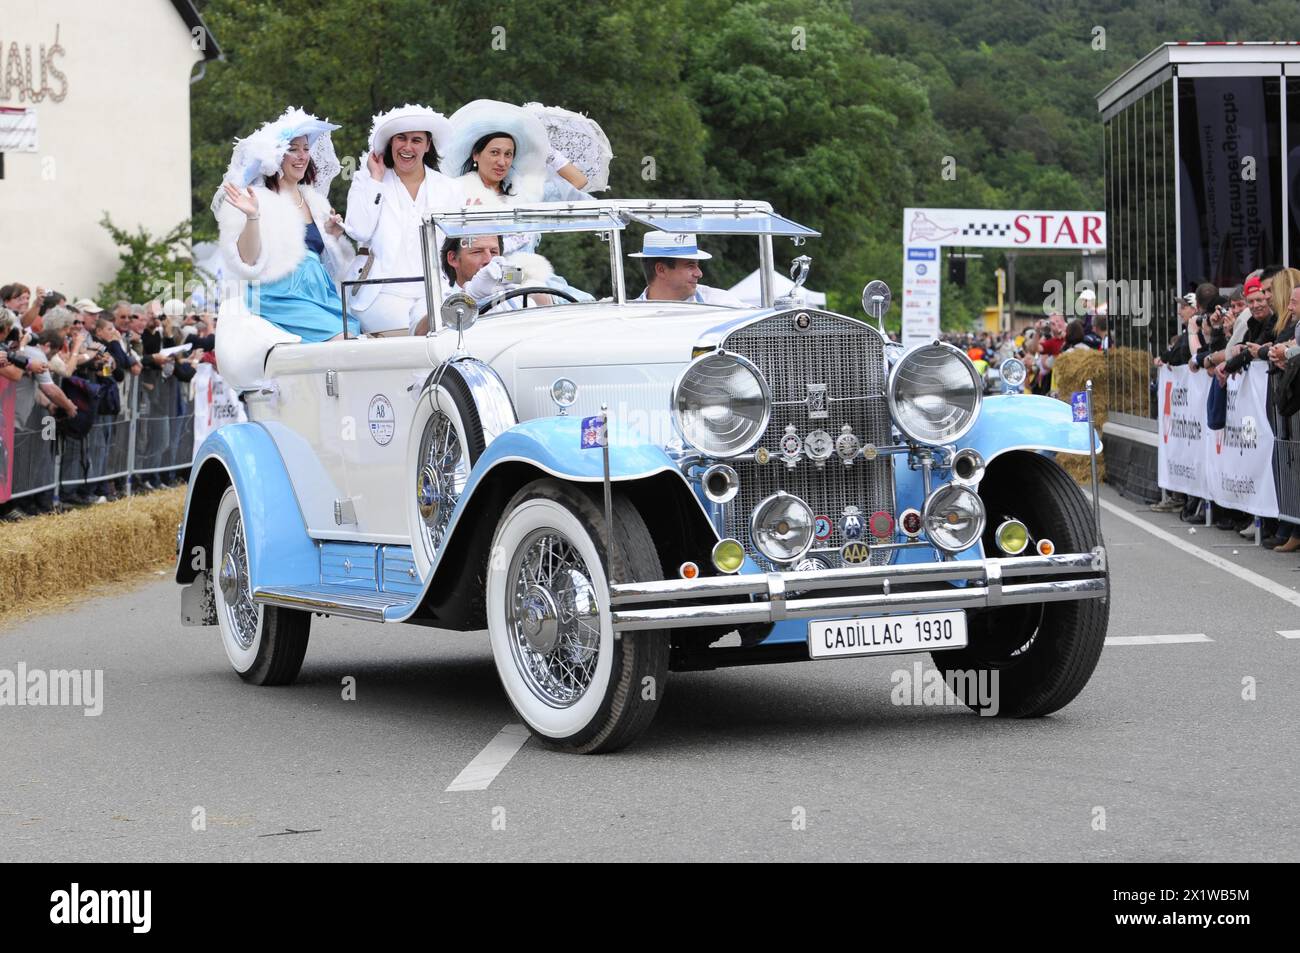 Cadillac Imperial Phaeton, built in 1930, A white Cadillac convertible with costumed woman drives past cheering spectators, SOLITUDE REVIVAL 2011 Stock Photo